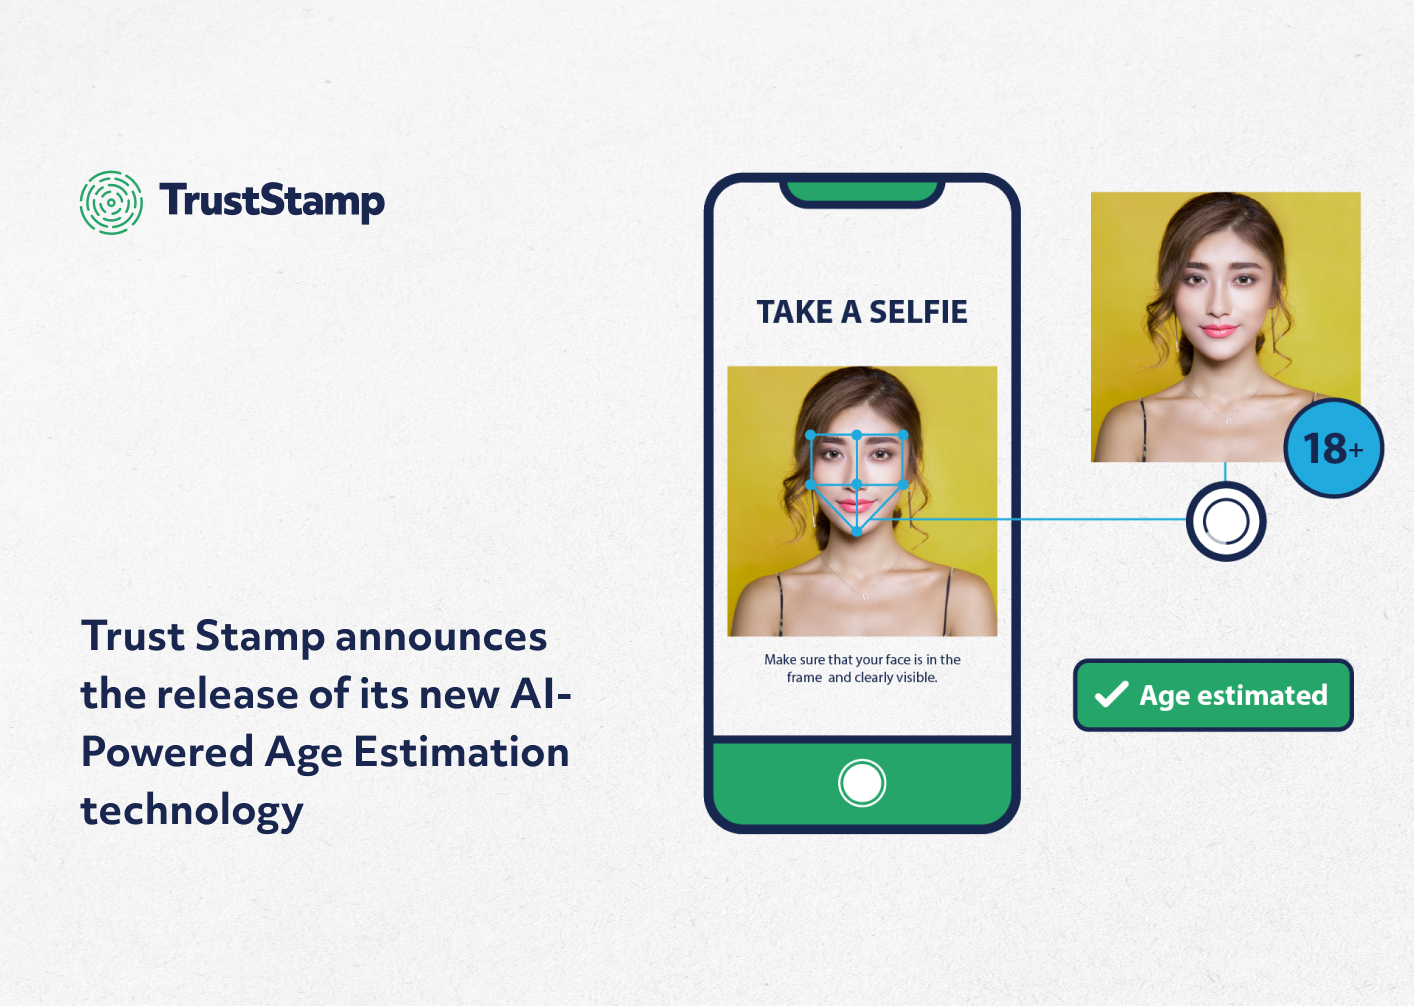 trust-stamp-announces-the-release-of-its-new-ai-powered-age-estimation-technology